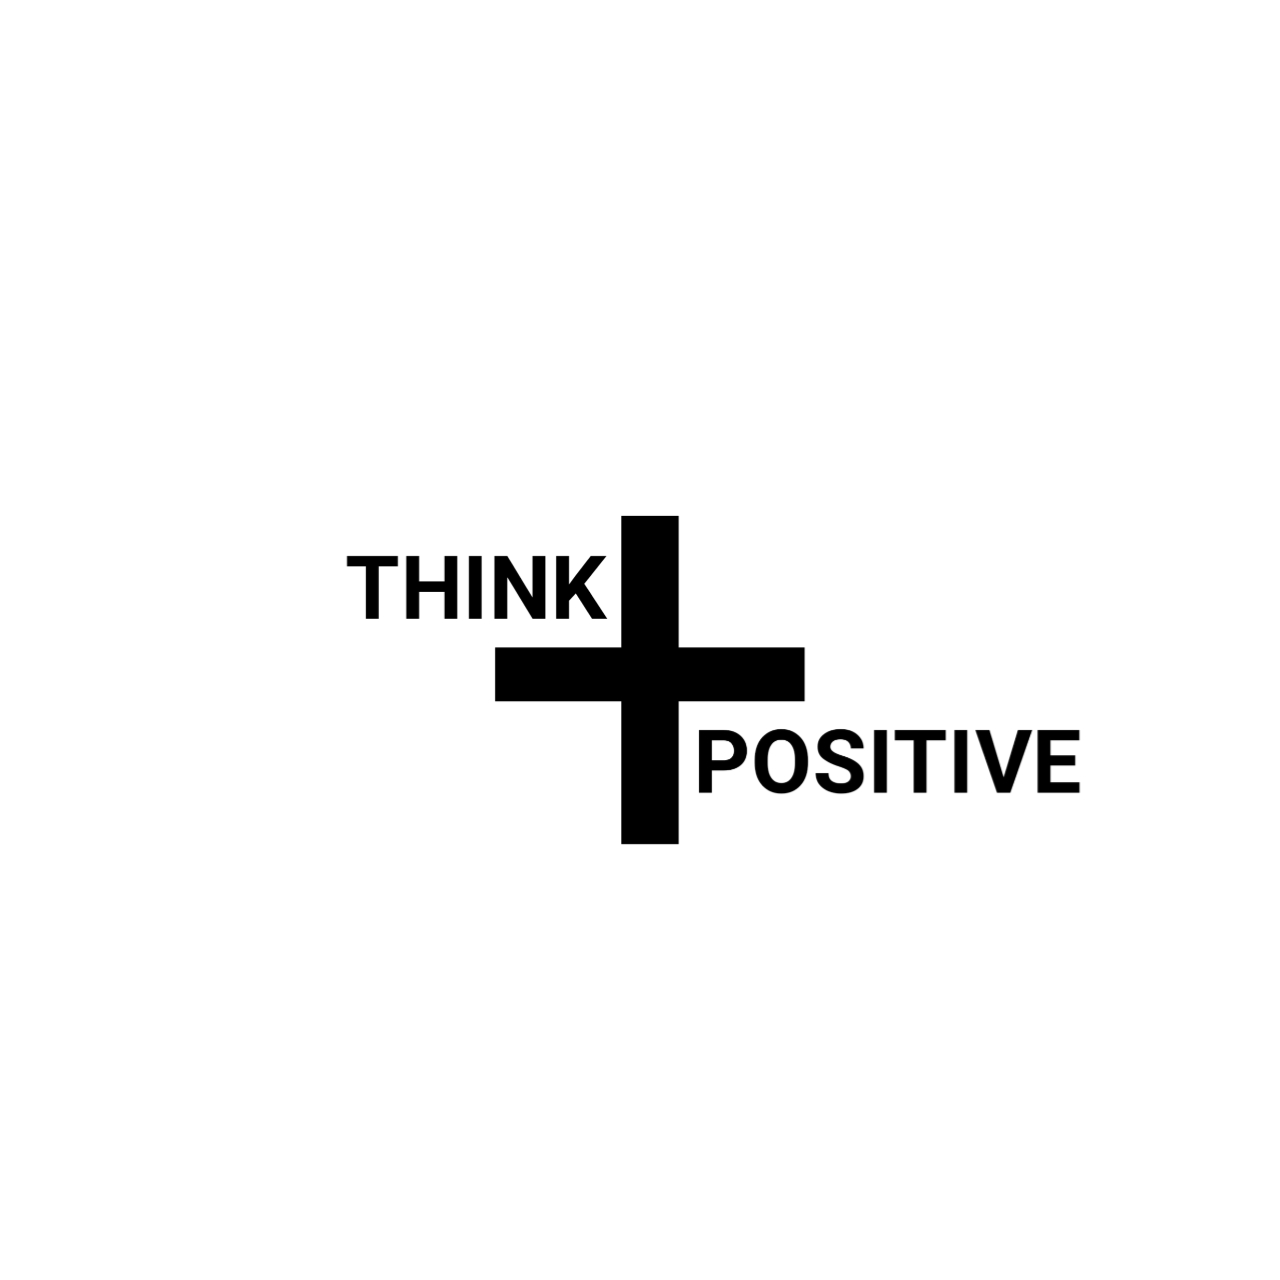 Little Tattoos — Little wrist tattoo saying “Think positive”, with...